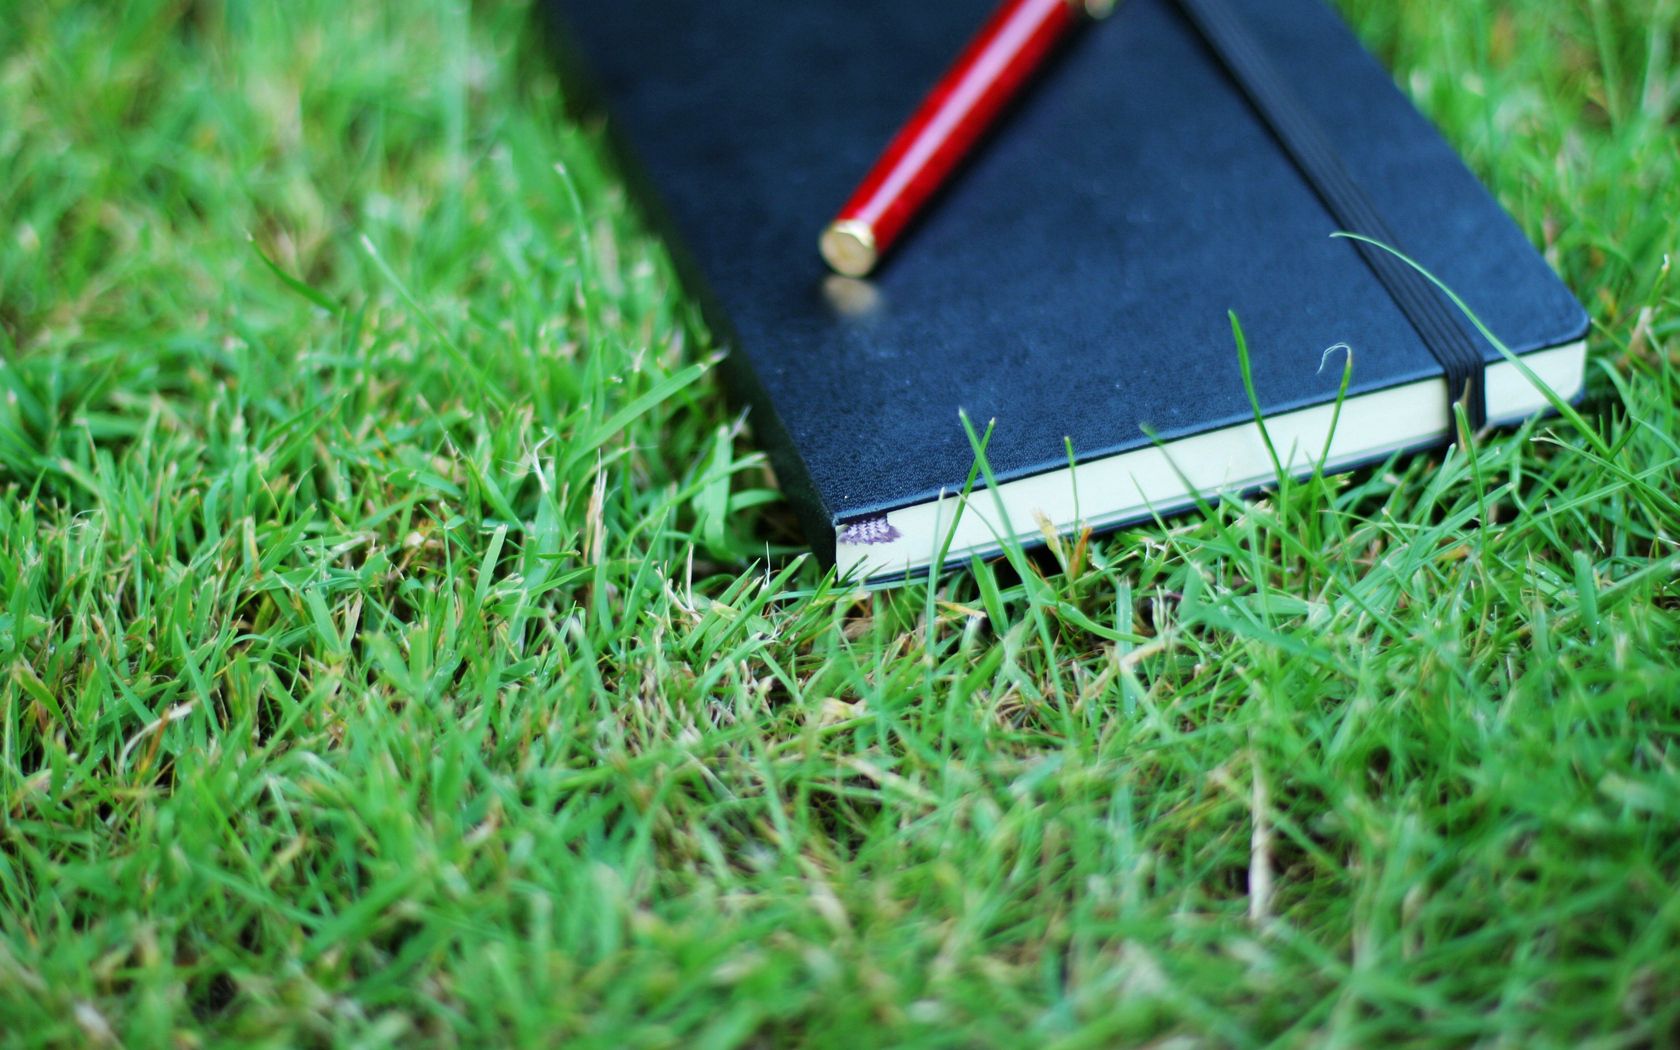 154019 download wallpaper grass, miscellanea, miscellaneous, greens, notebook, notepad, pen screensavers and pictures for free